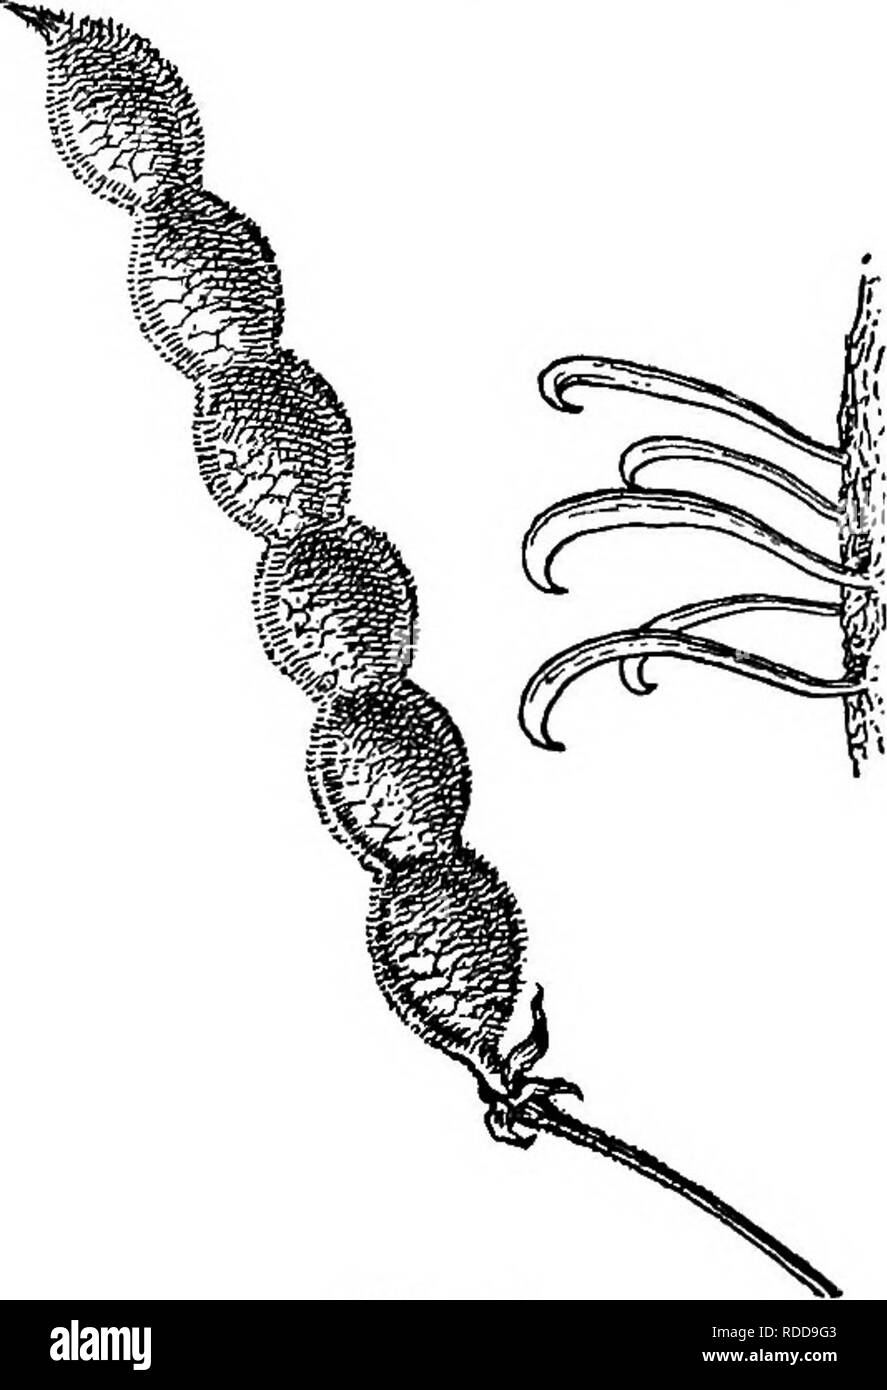 . Lessons in botany. Botany. Fig. 245. Bur of bidens or bur-marigold, show- ing barbed seeds.. Fig. 246. Seed pod of tick-treefoil (desmodium); at the right some of the hooks greatly magnified. are stealing a ride at our expense and annoyance. The hooks and barbs on various seed-pods catch into the hairs of passing animals and the seeds may thus be transported considerable distances. Among the plants familiar to us, which have such contrivances for unlawfully gaining transportation, are the 292. Please note that these images are extracted from scanned page images that may have been digitally e Stock Photo